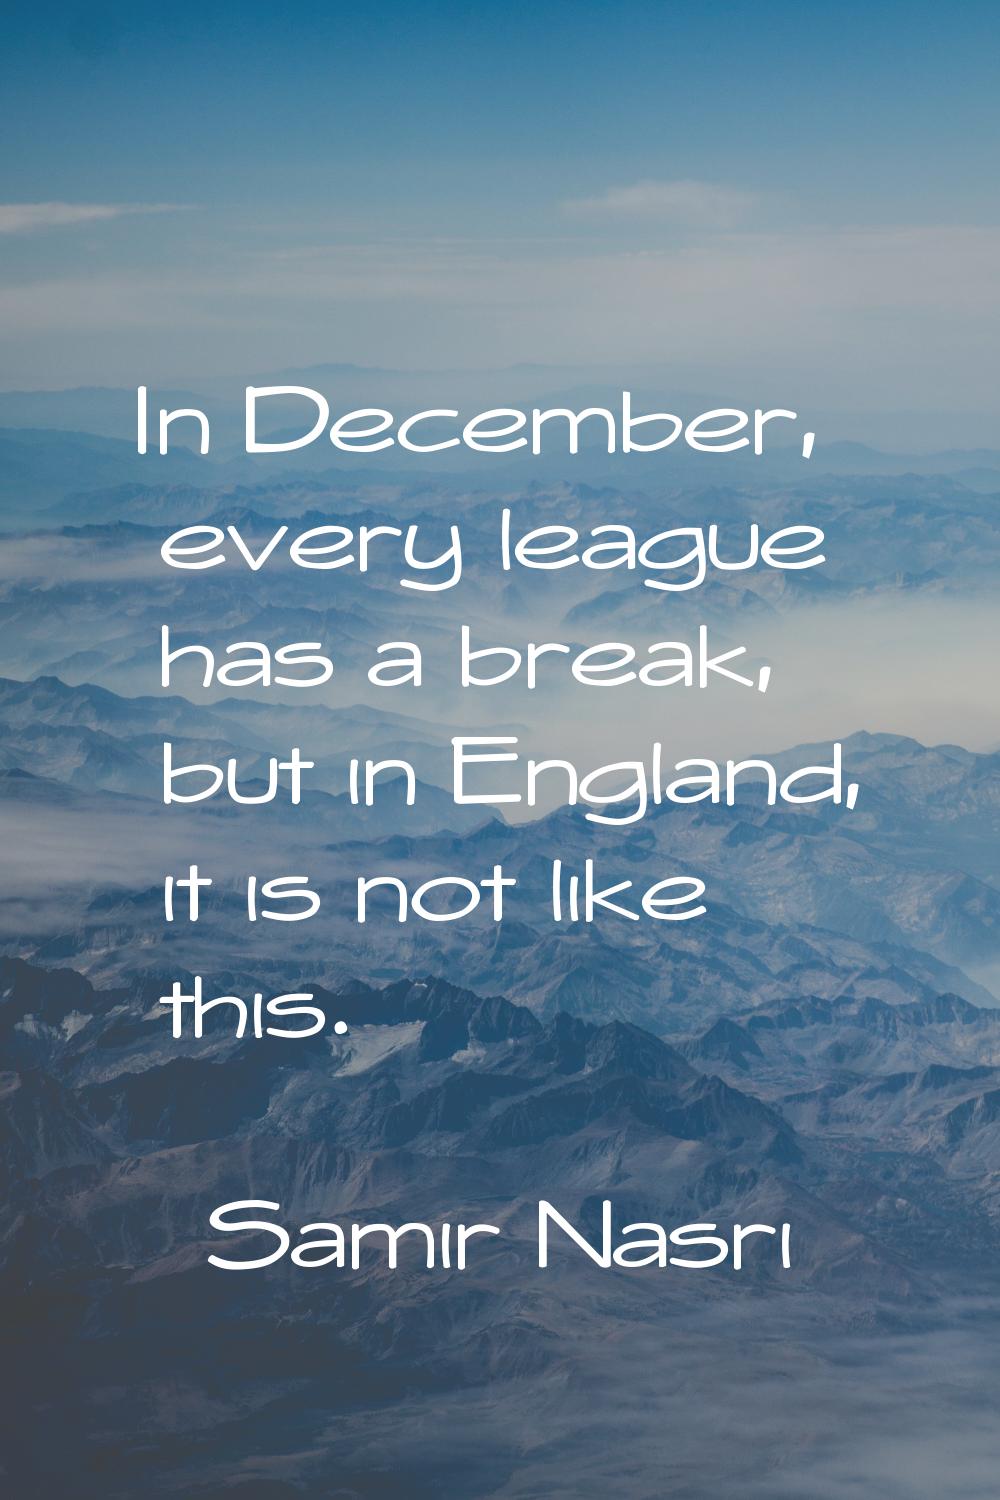 In December, every league has a break, but in England, it is not like this.